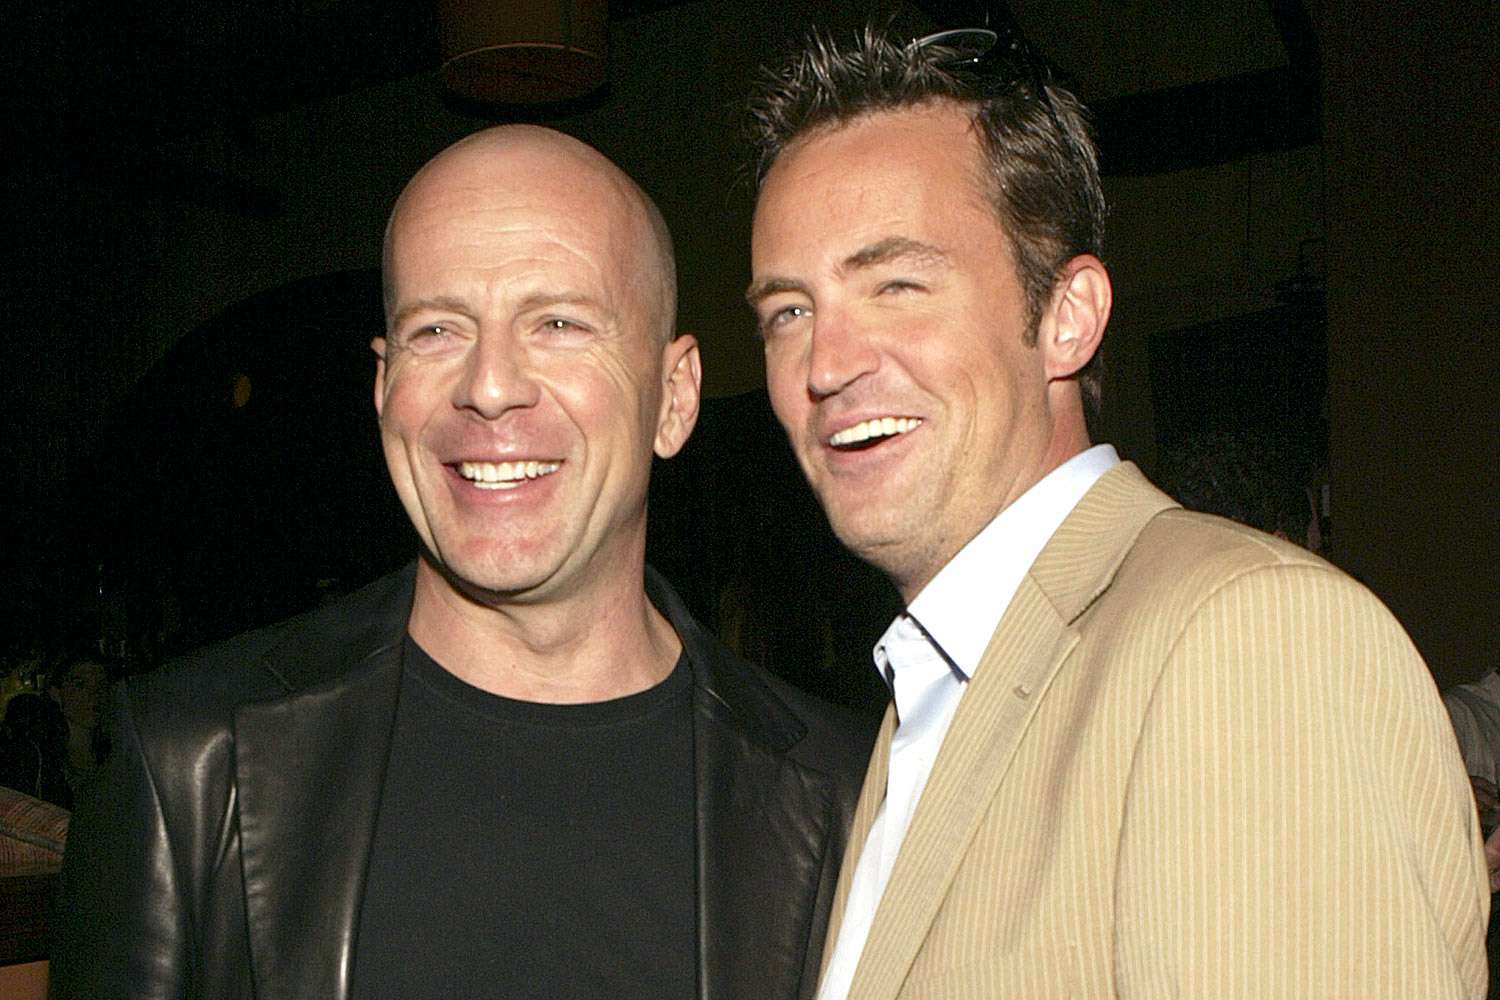 Bruce Willis and Matthew Perry during "The Whole Ten Yards" World Premiere